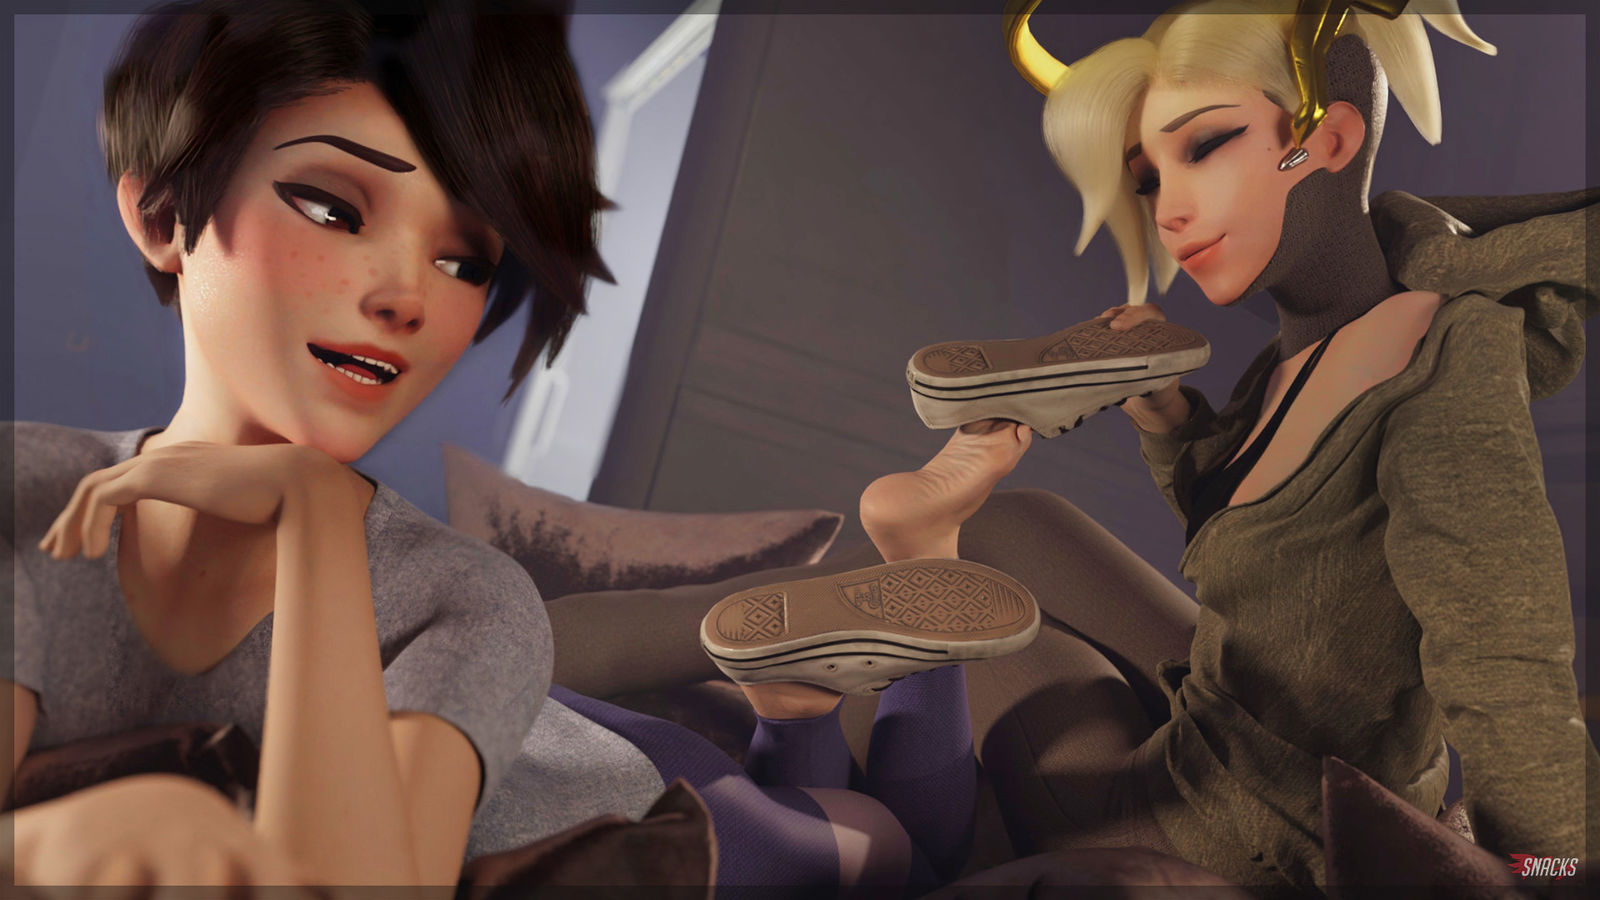 Tracer and Mercy - Shoe Removal